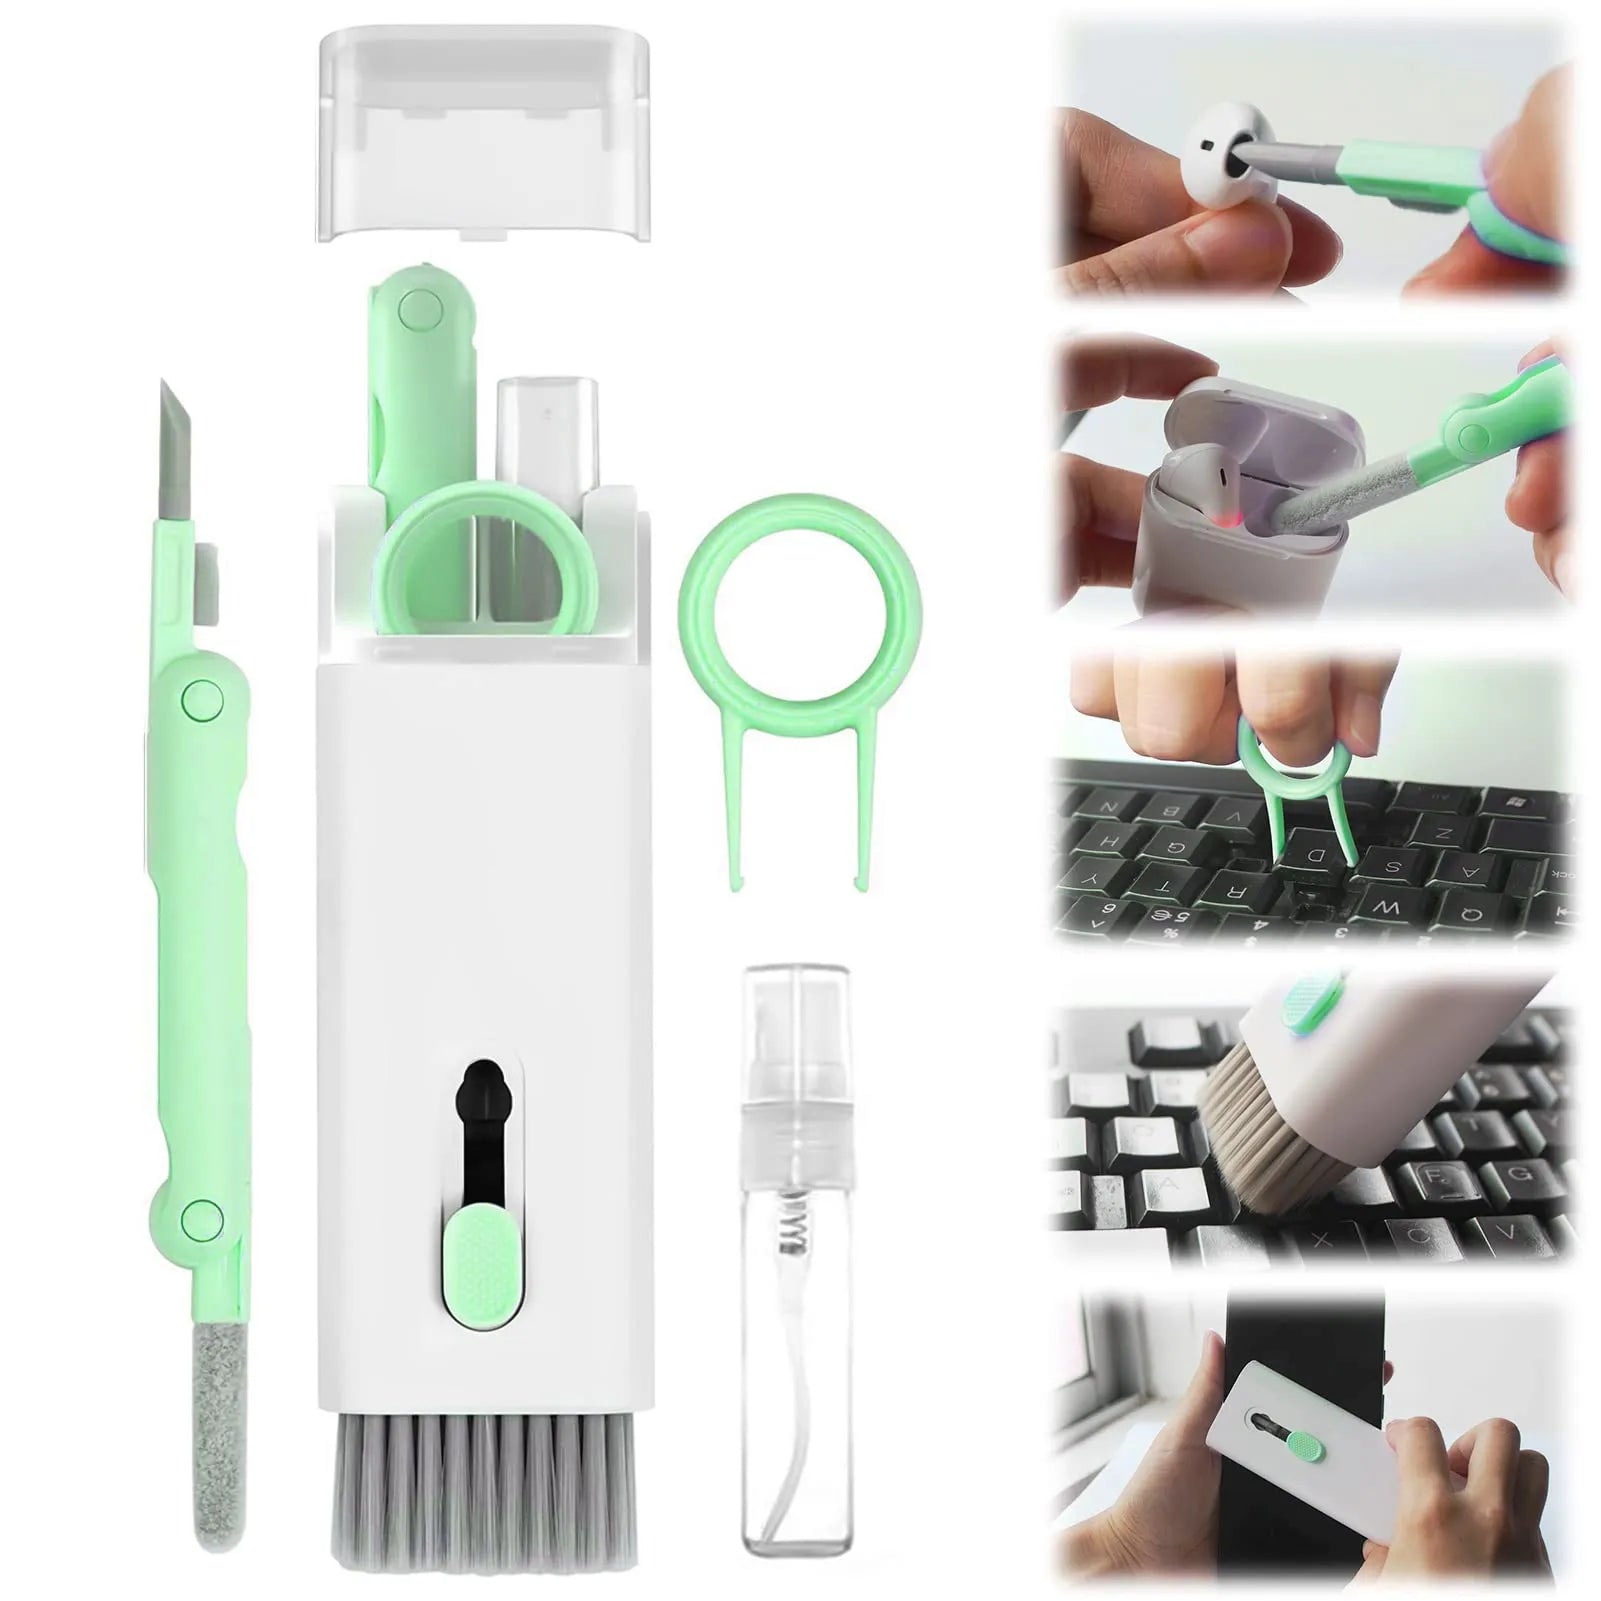 7in1 Computer or Phone Cleaning Set